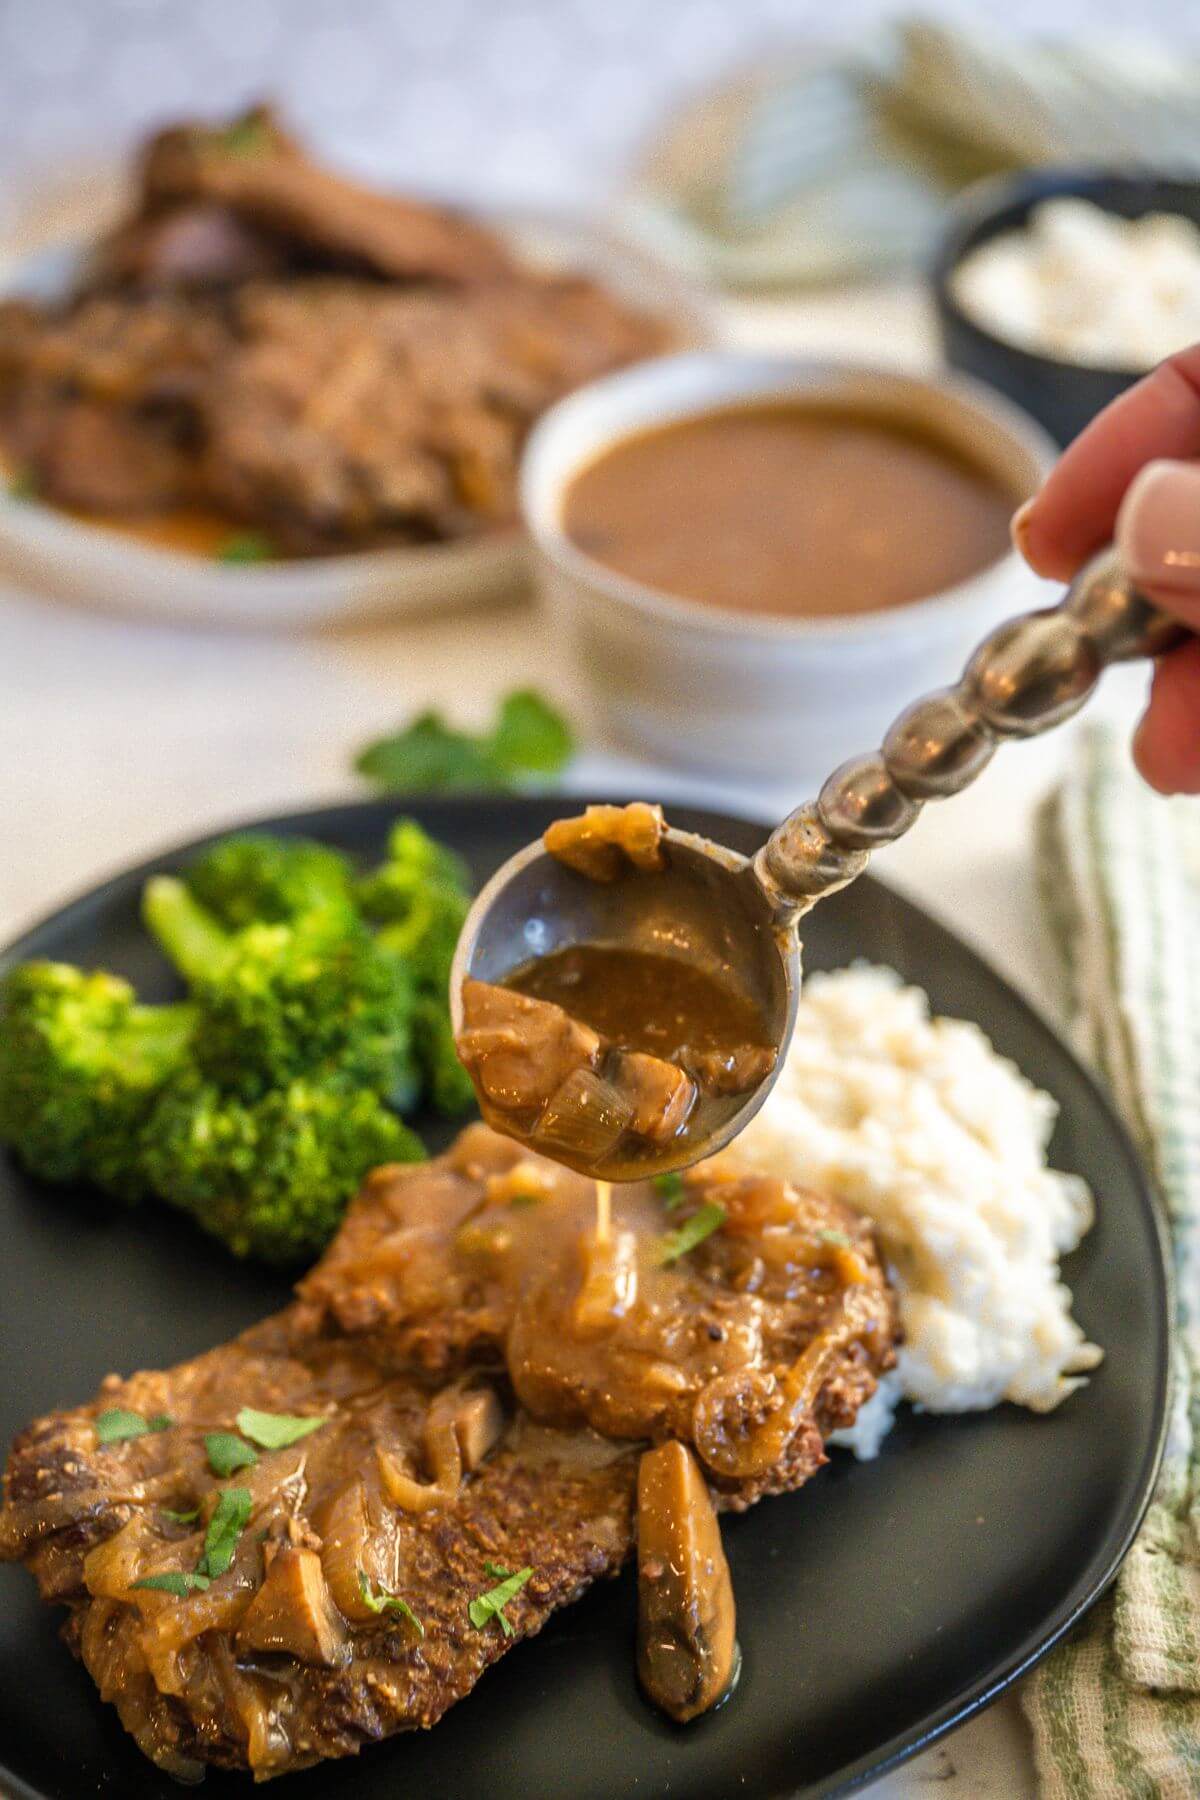 Someone's hand uses fancy spoon to pour gravy on cube steak on plate.